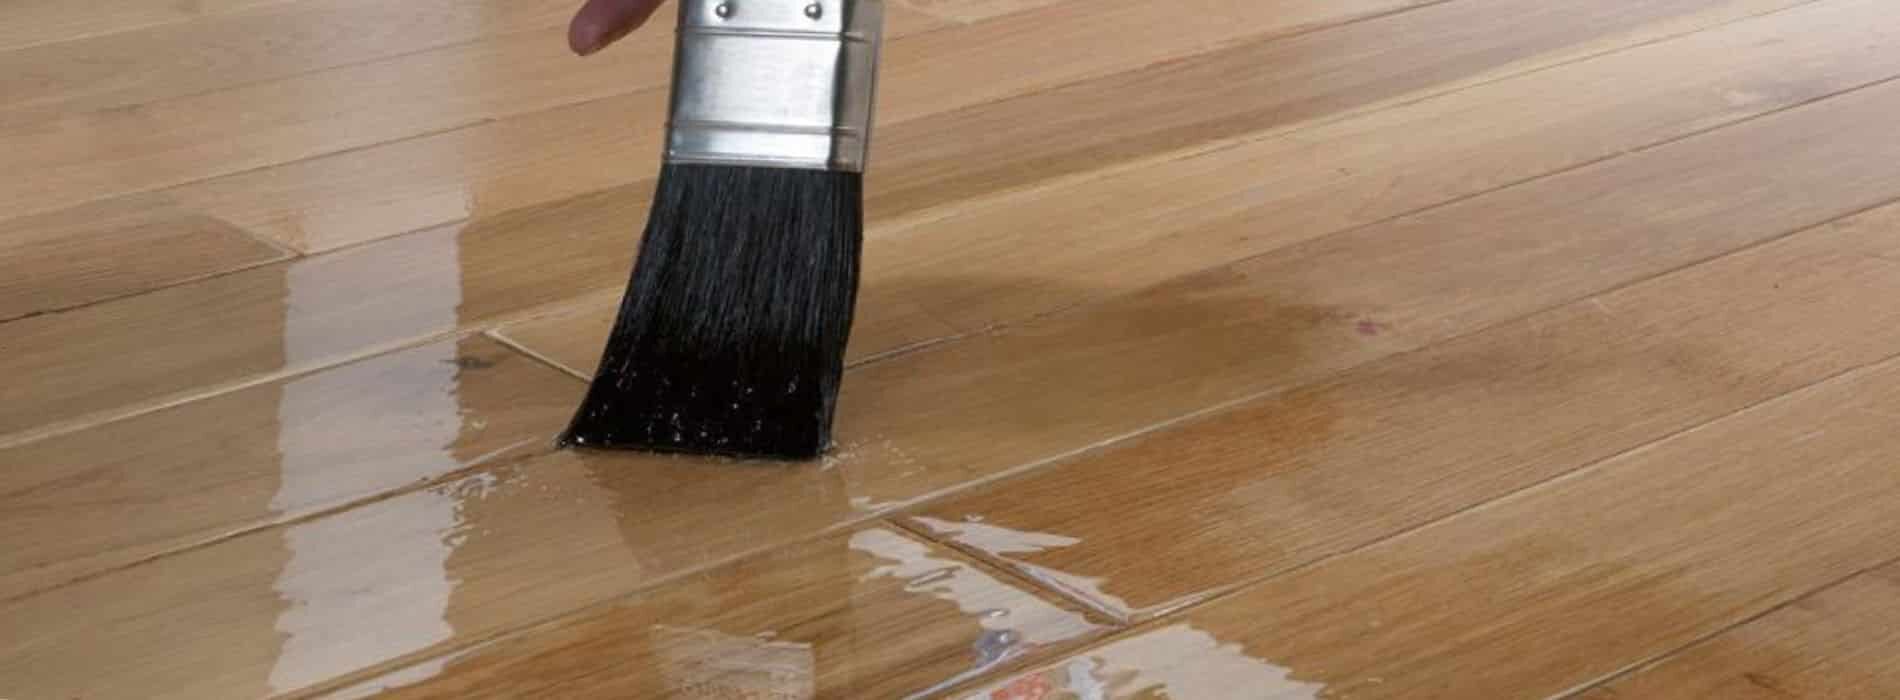 A person holding a paint brush on a hard wood floor.